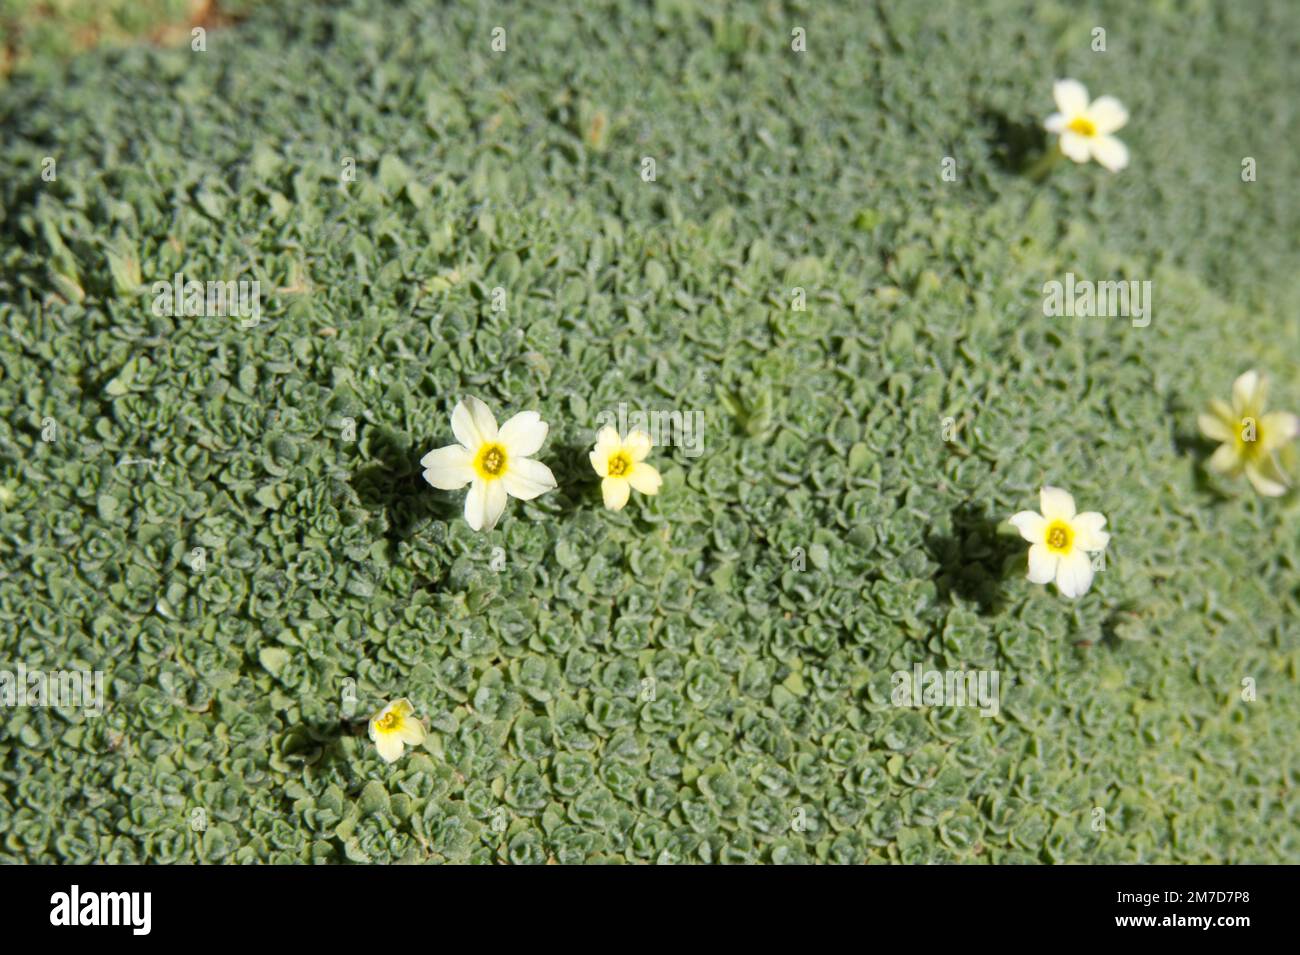 Autumn flowers of Dionysia cunflavax tapetodes Manika in UK glasshouse October Stock Photo